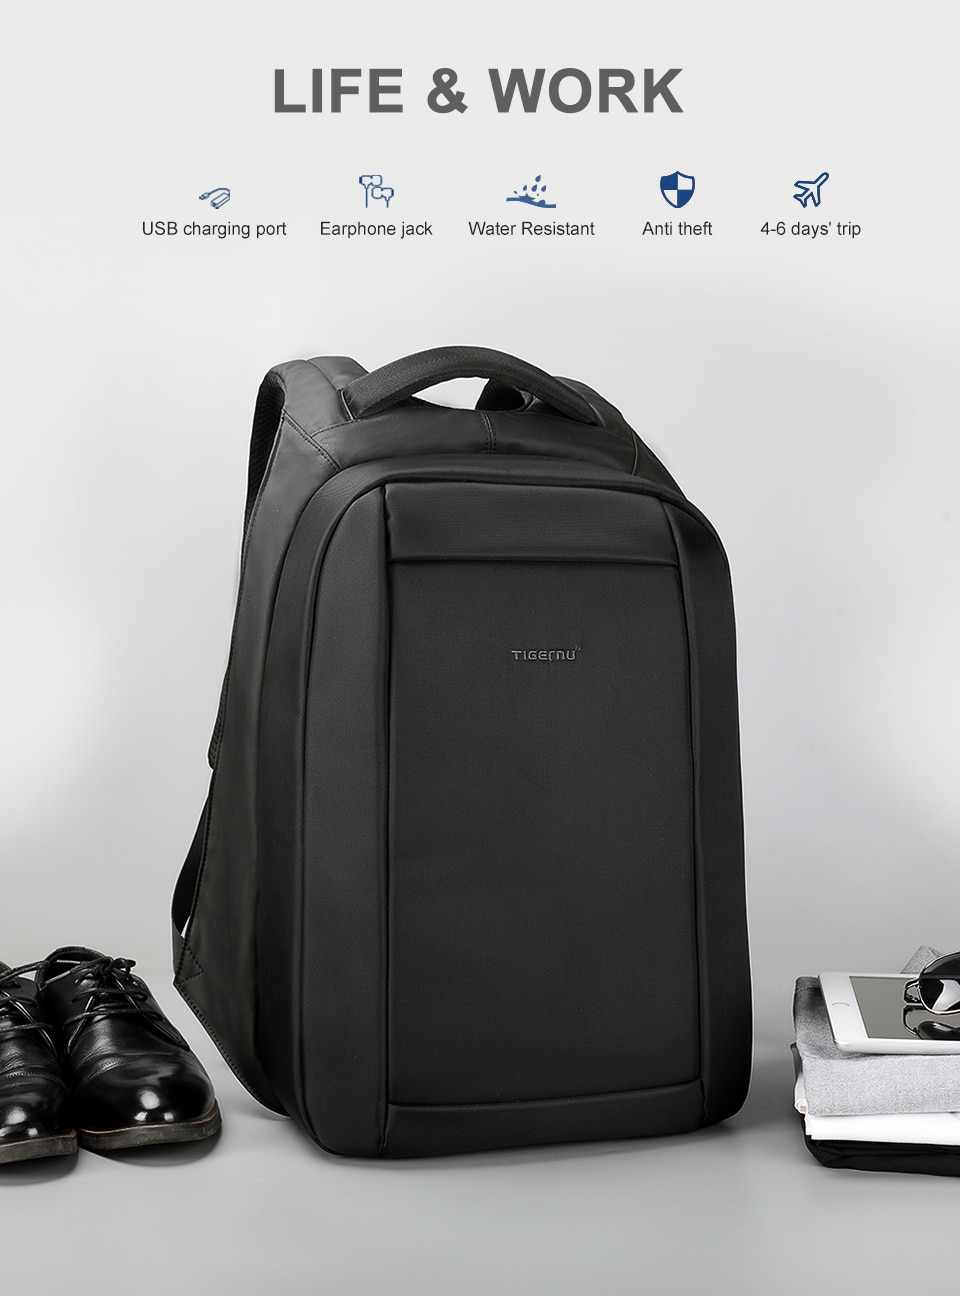 1.anti theft travel backpack